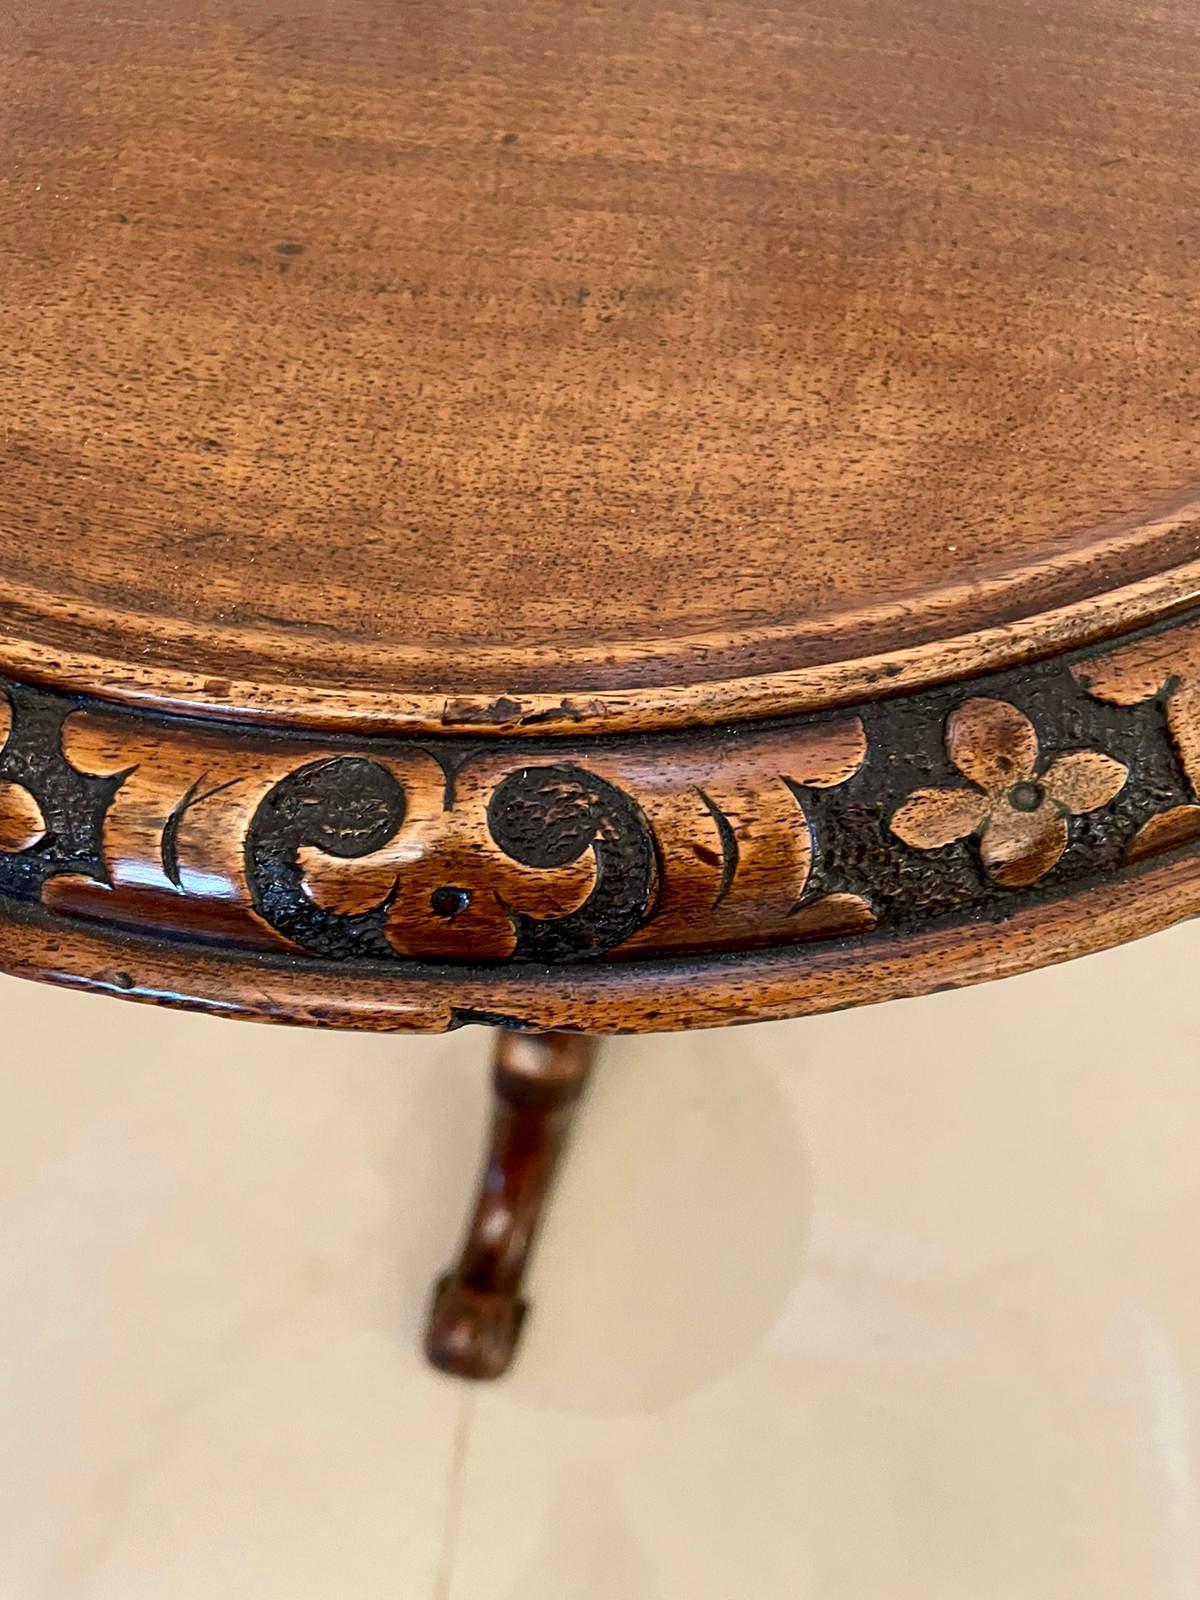 Quality antique Victorian carved walnut circular lamp table having a quality carved walnut circular top supported by an attractive solid carved walnut pedestal raised on three solid carved walnut shaped cabriole legs with scroll feet.

Measures: H